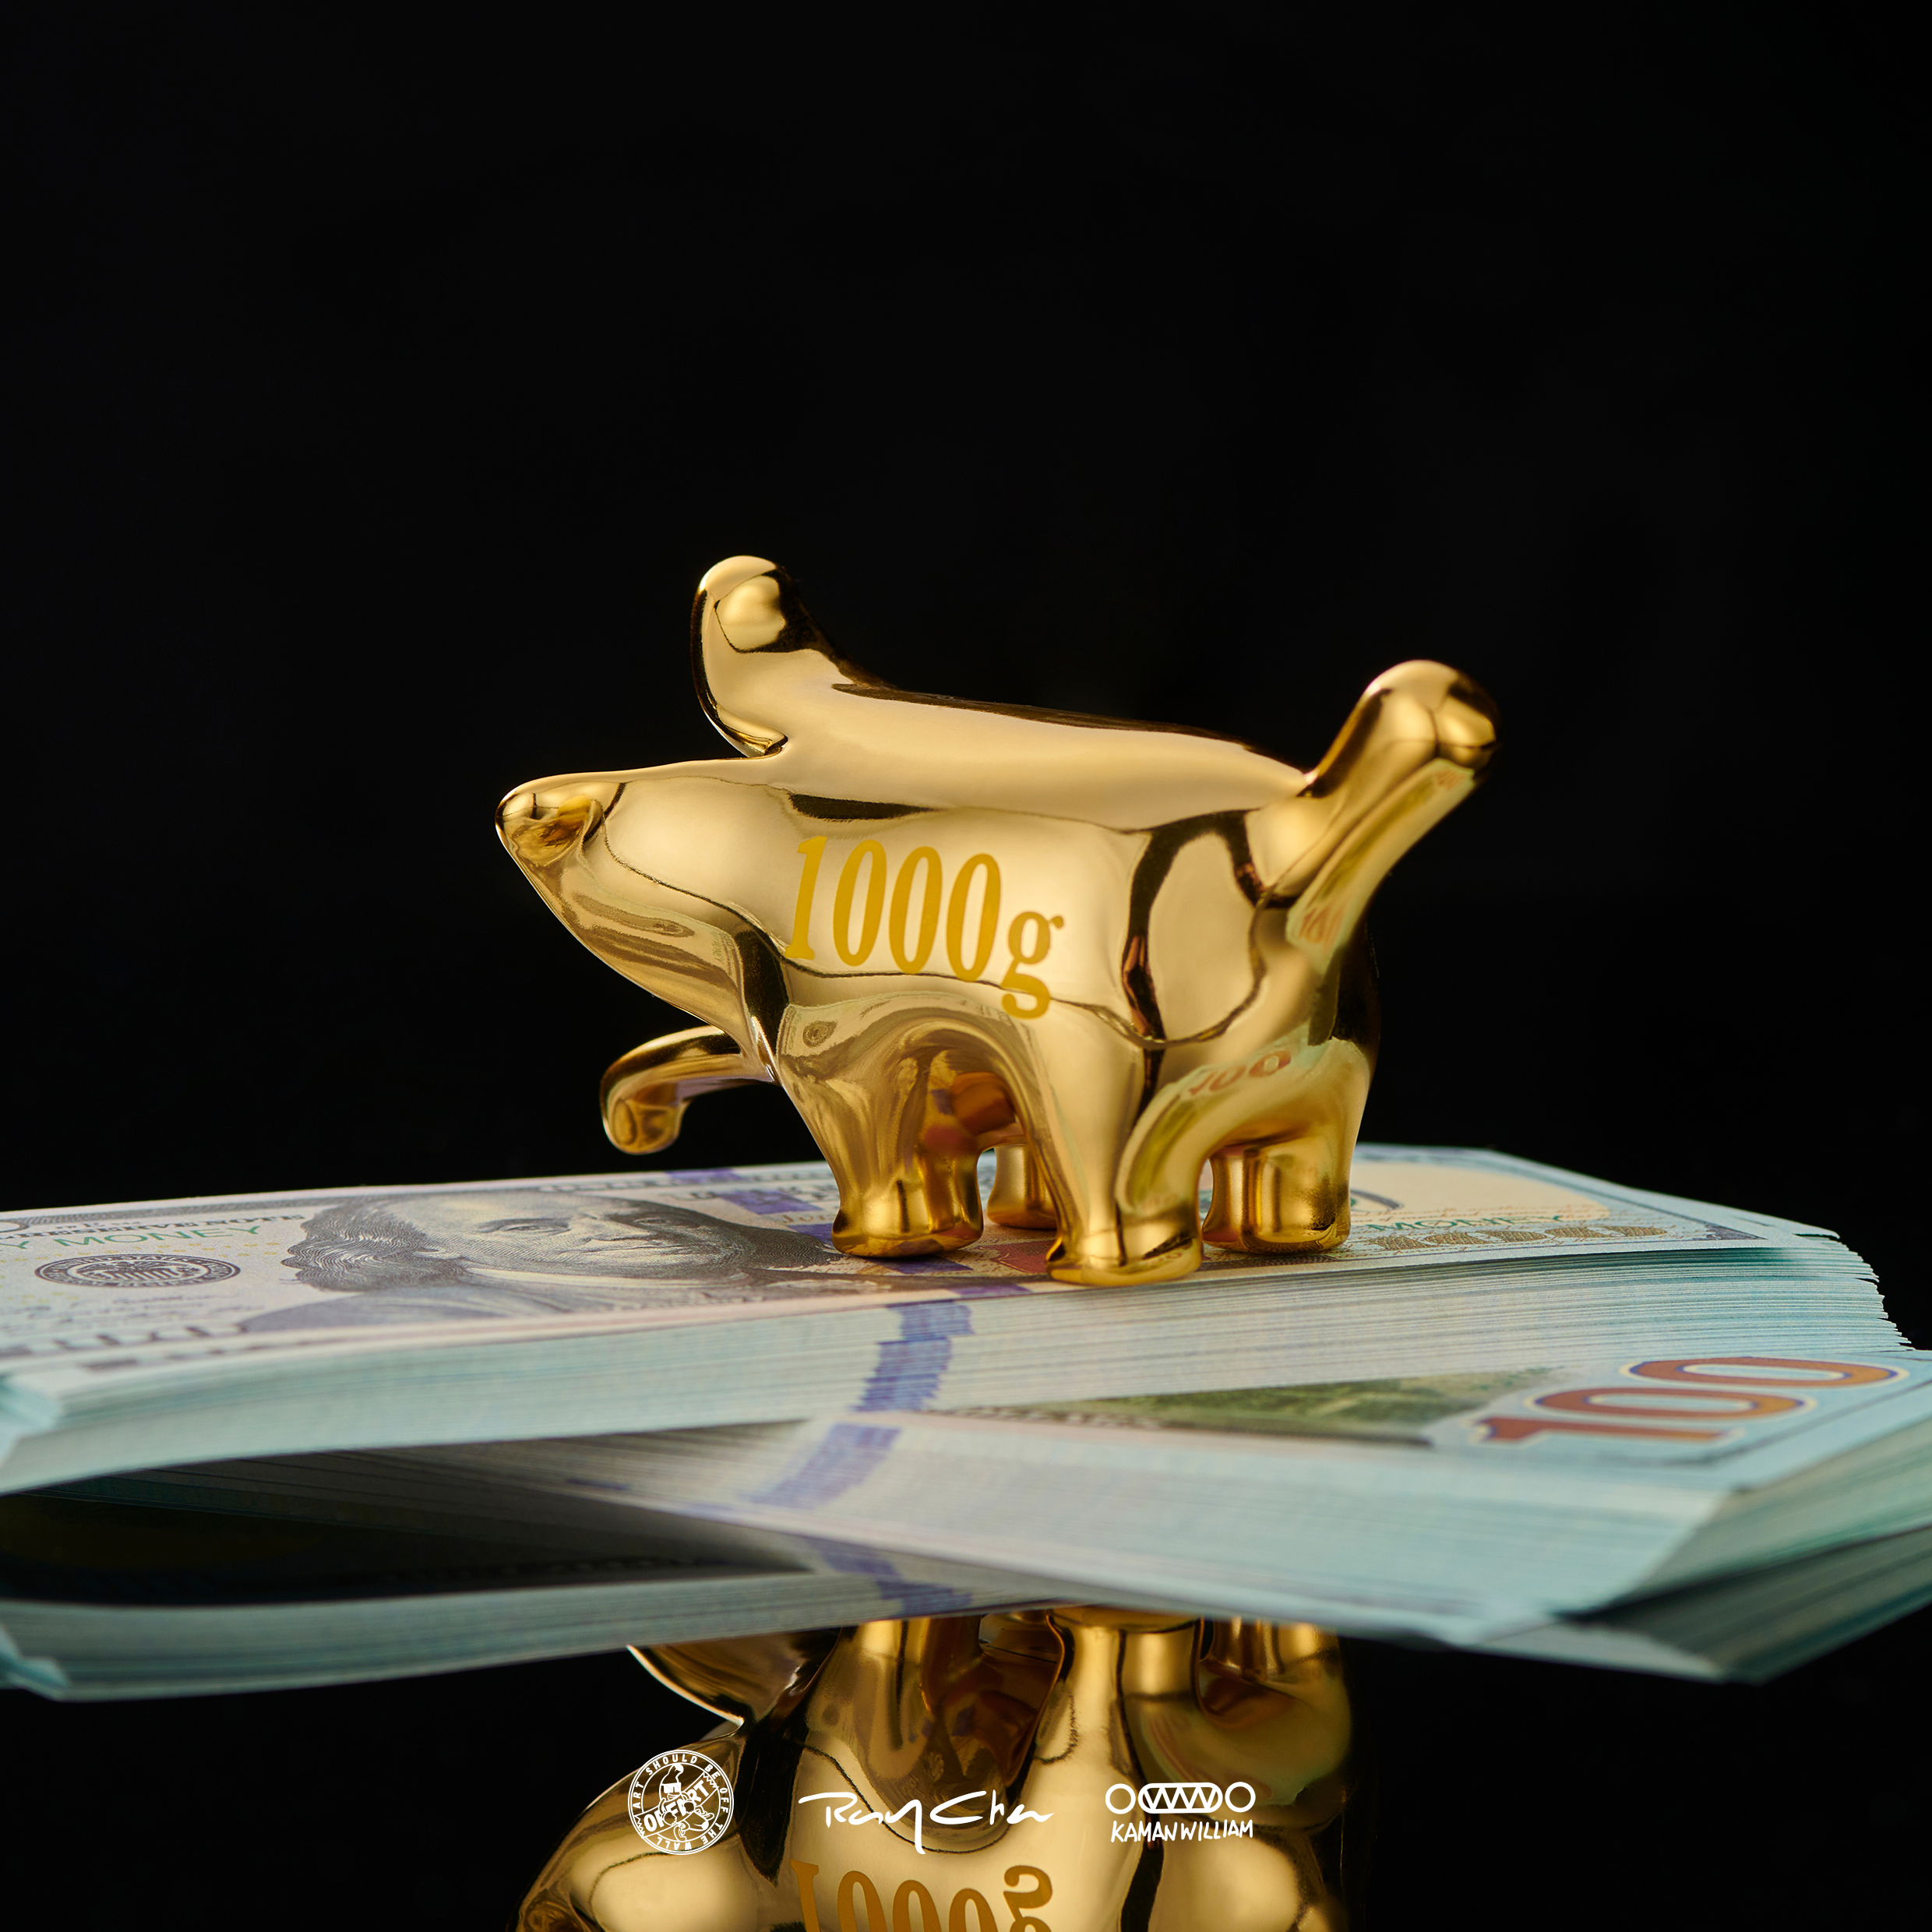 A gold piggy bank with a detachable banana pulp feature, designed by Kamanwilliam for OFFART. Statue-like brass dog mini edition. Reflects Strangecat Toys' blind box and art toy store essence.